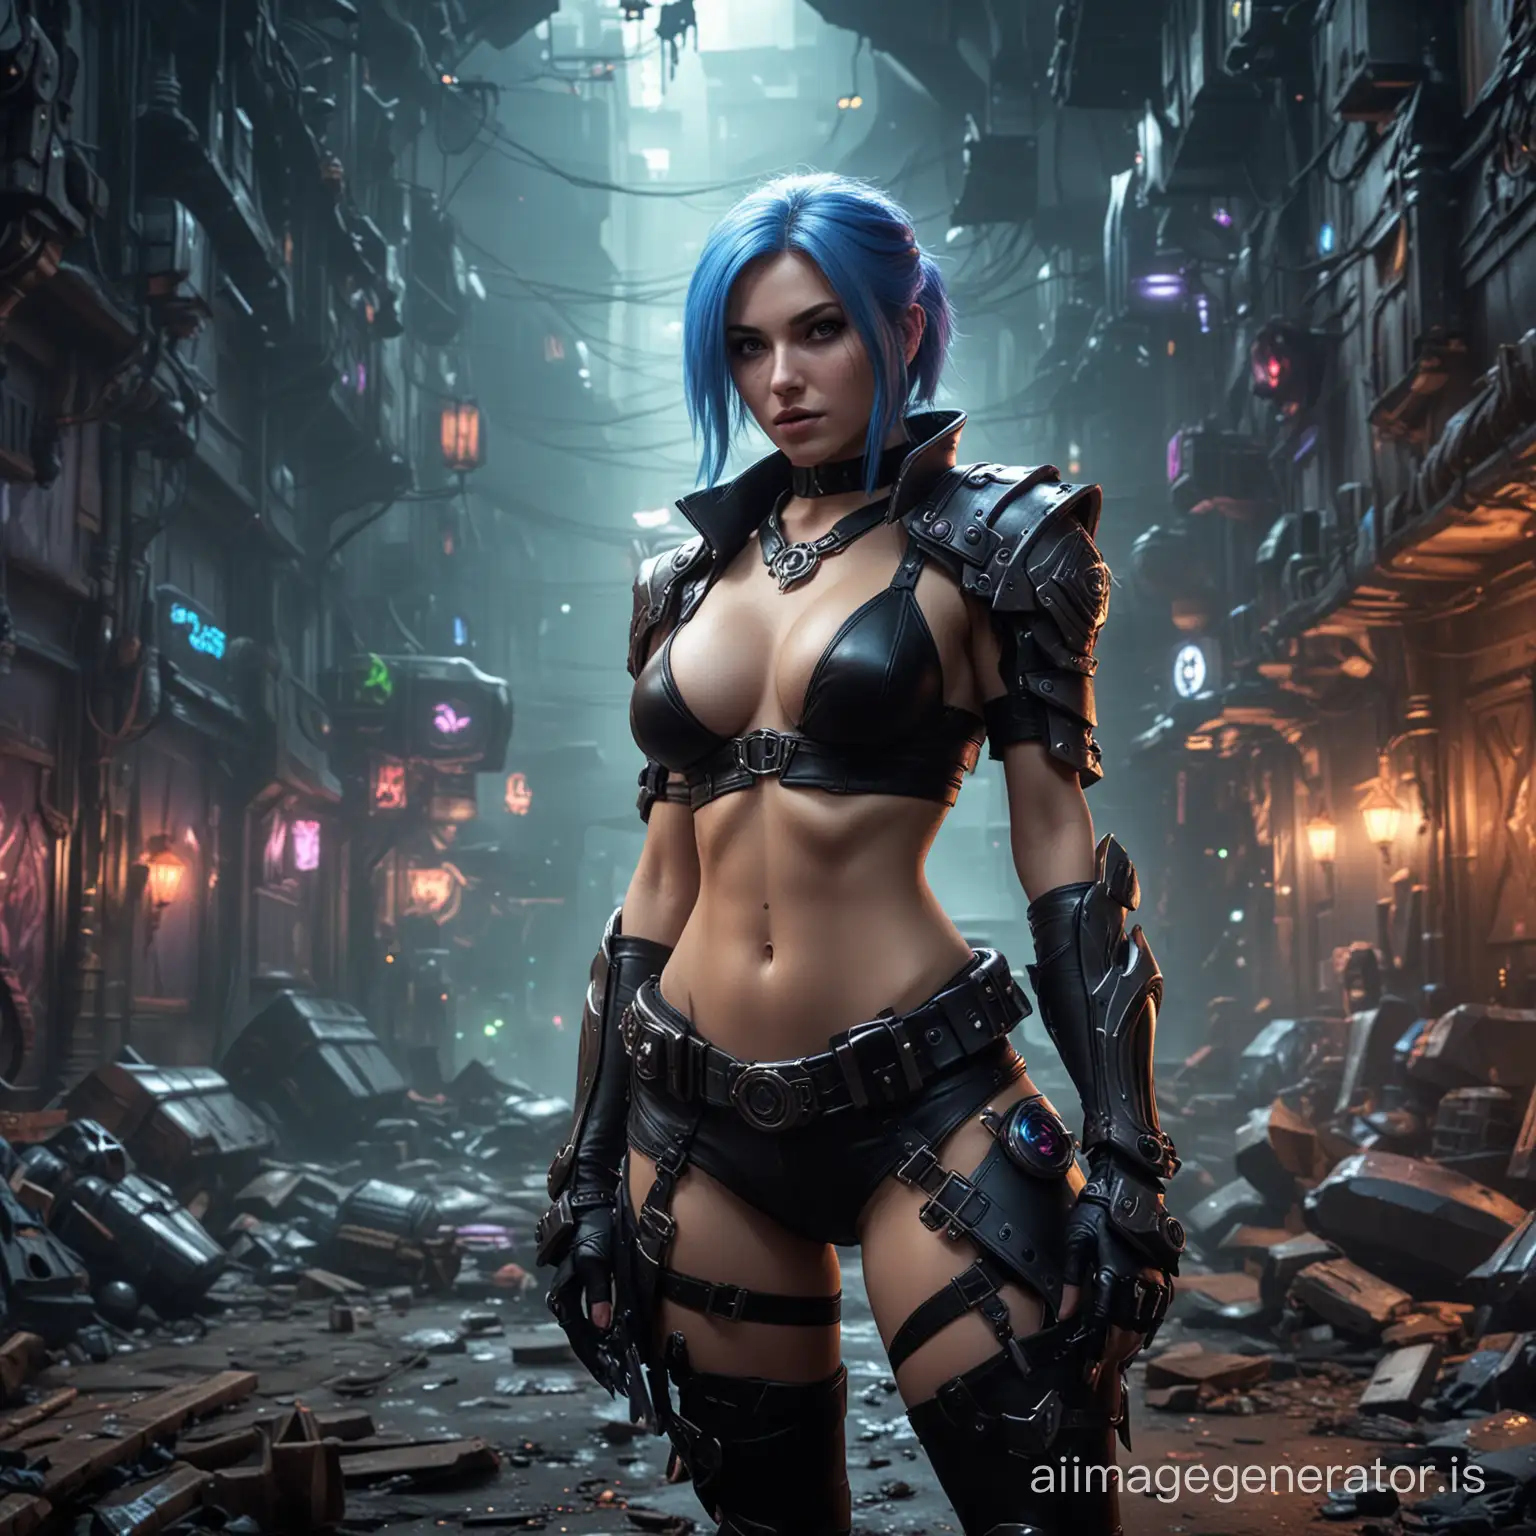 Sensual-Jinx-from-League-of-Legends-in-GigerStyle-Neon-Abandoned-World